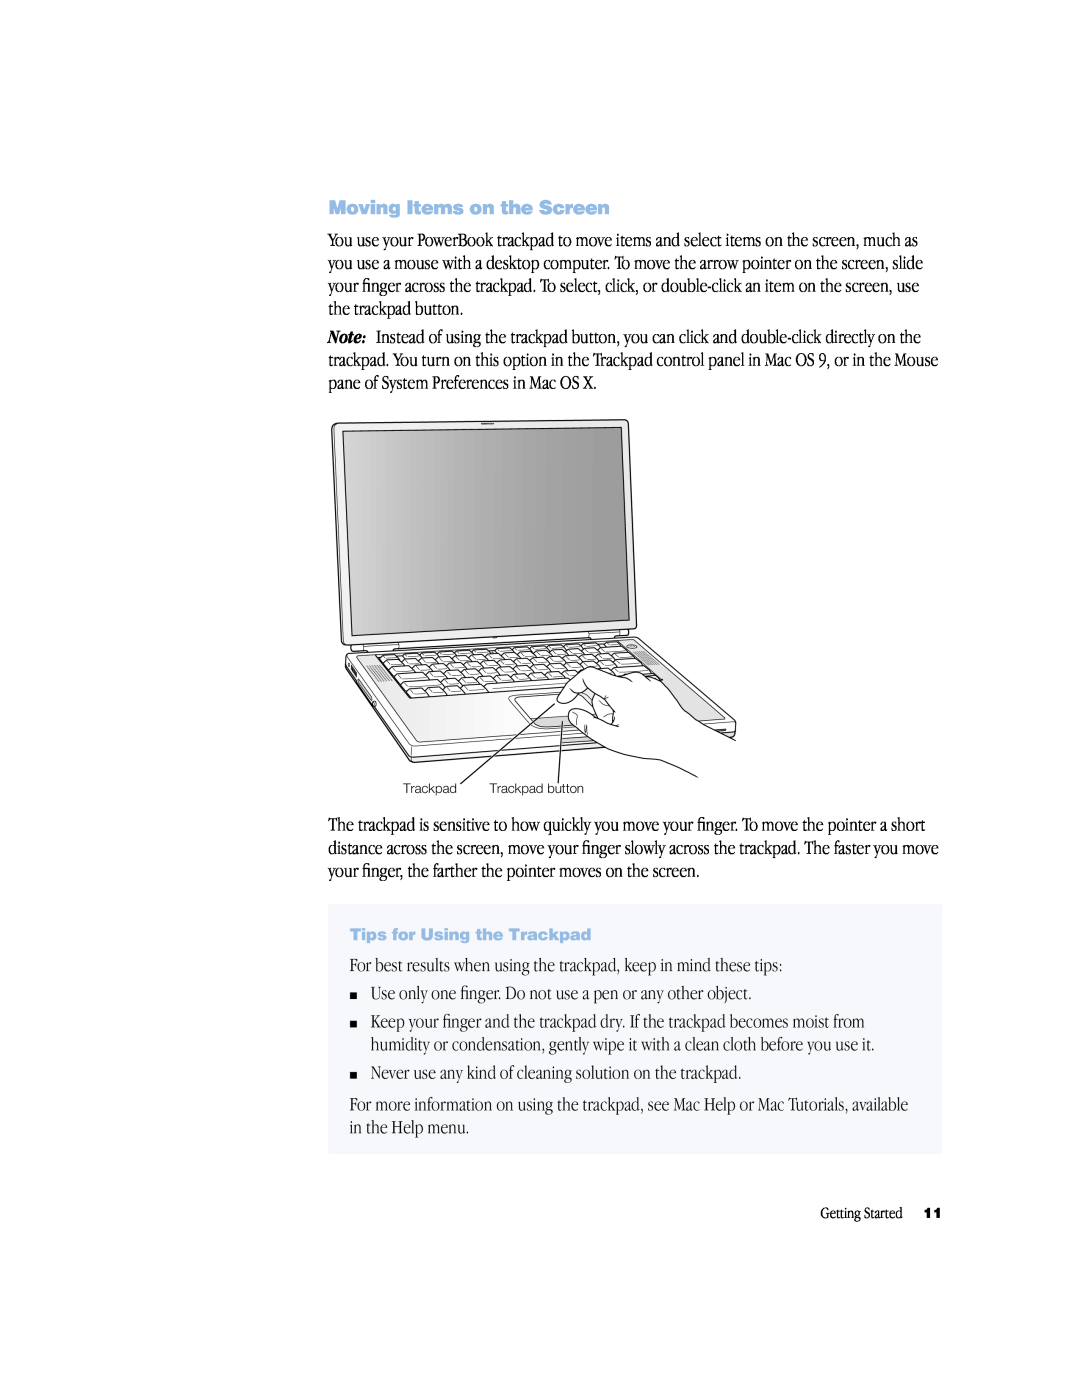 Apple powerbook g4 manual Moving Items on the Screen, For best results when using the trackpad, keep in mind these tips 